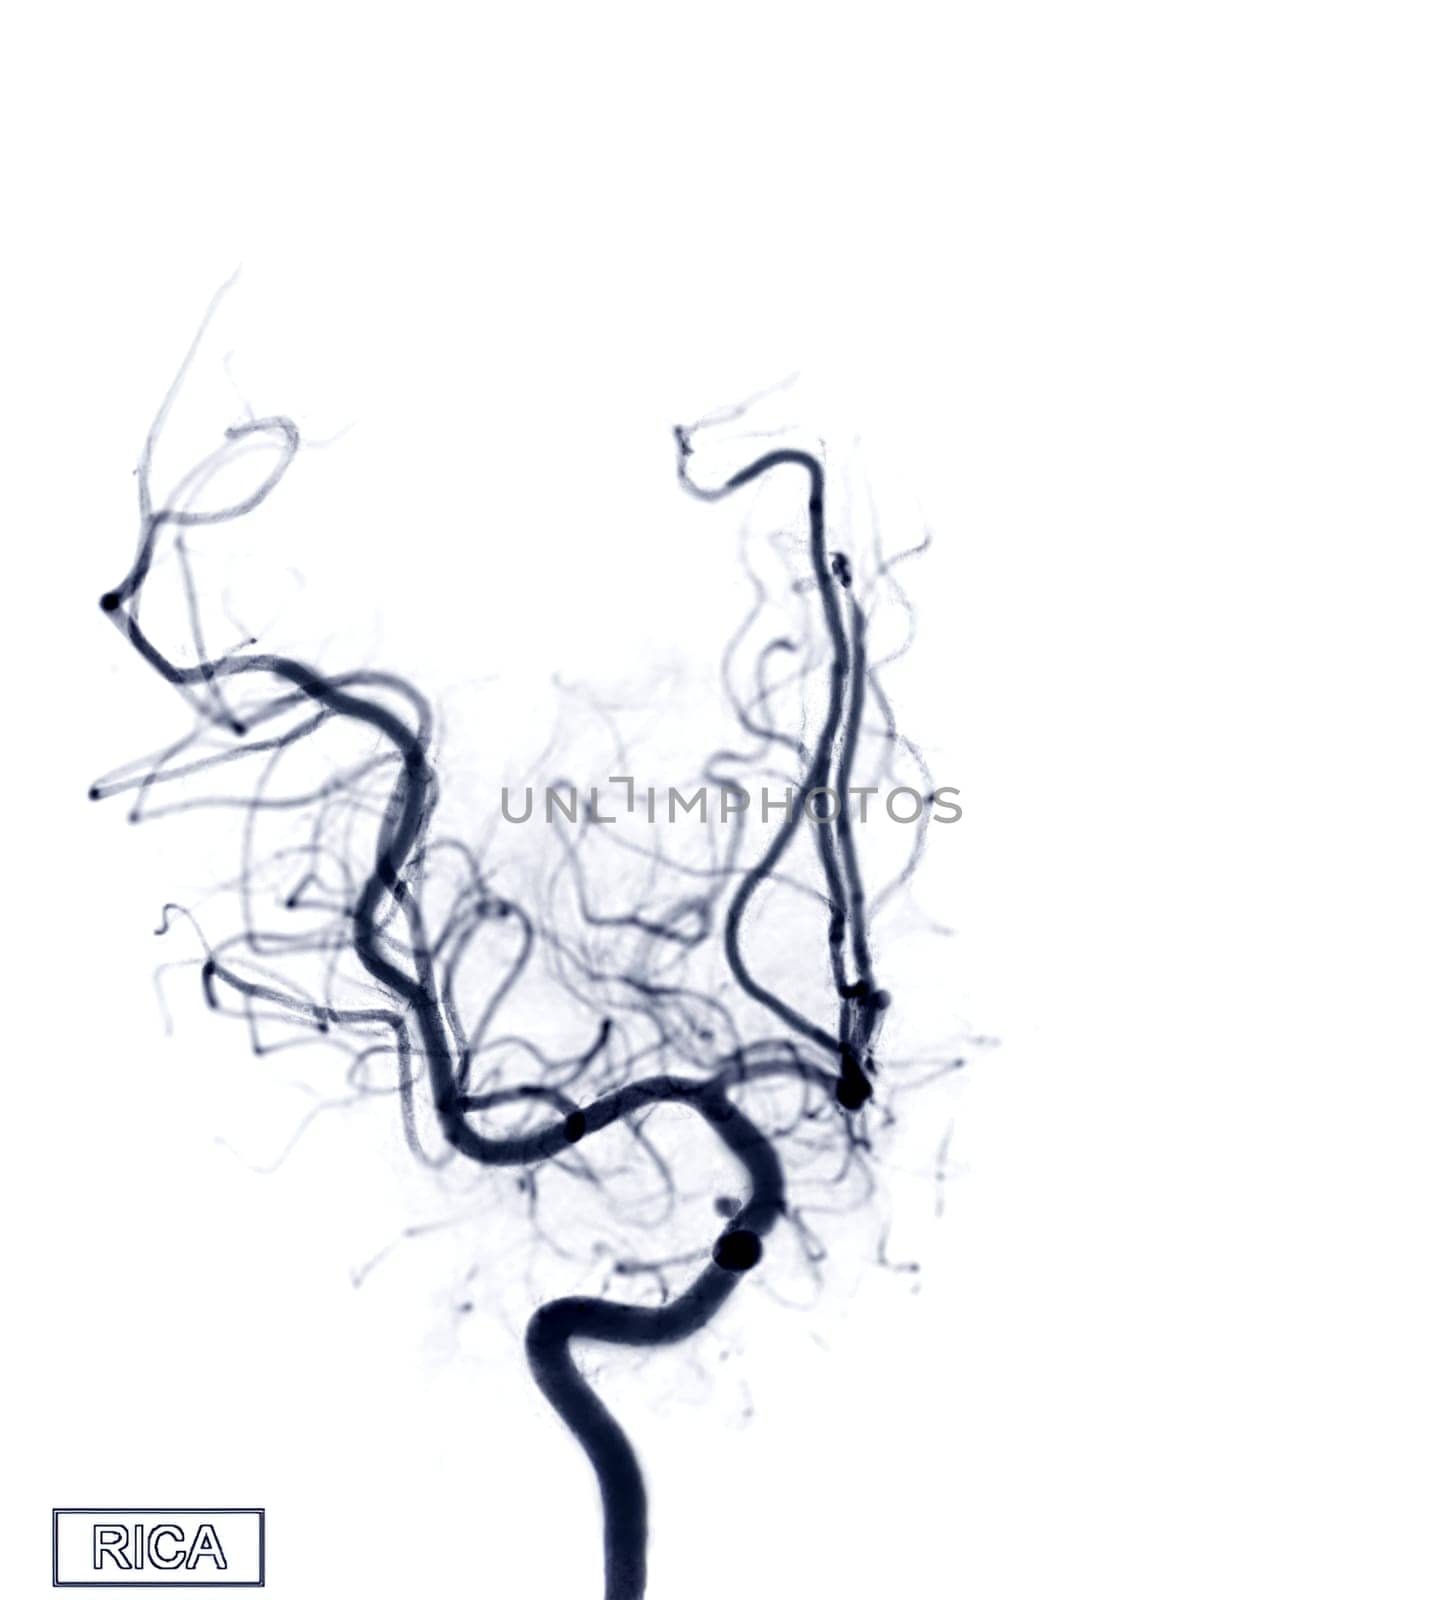 Cerebral angiography  image of RICA from Fluoroscopy in intervention radiology  showing cerebral artery. by samunella